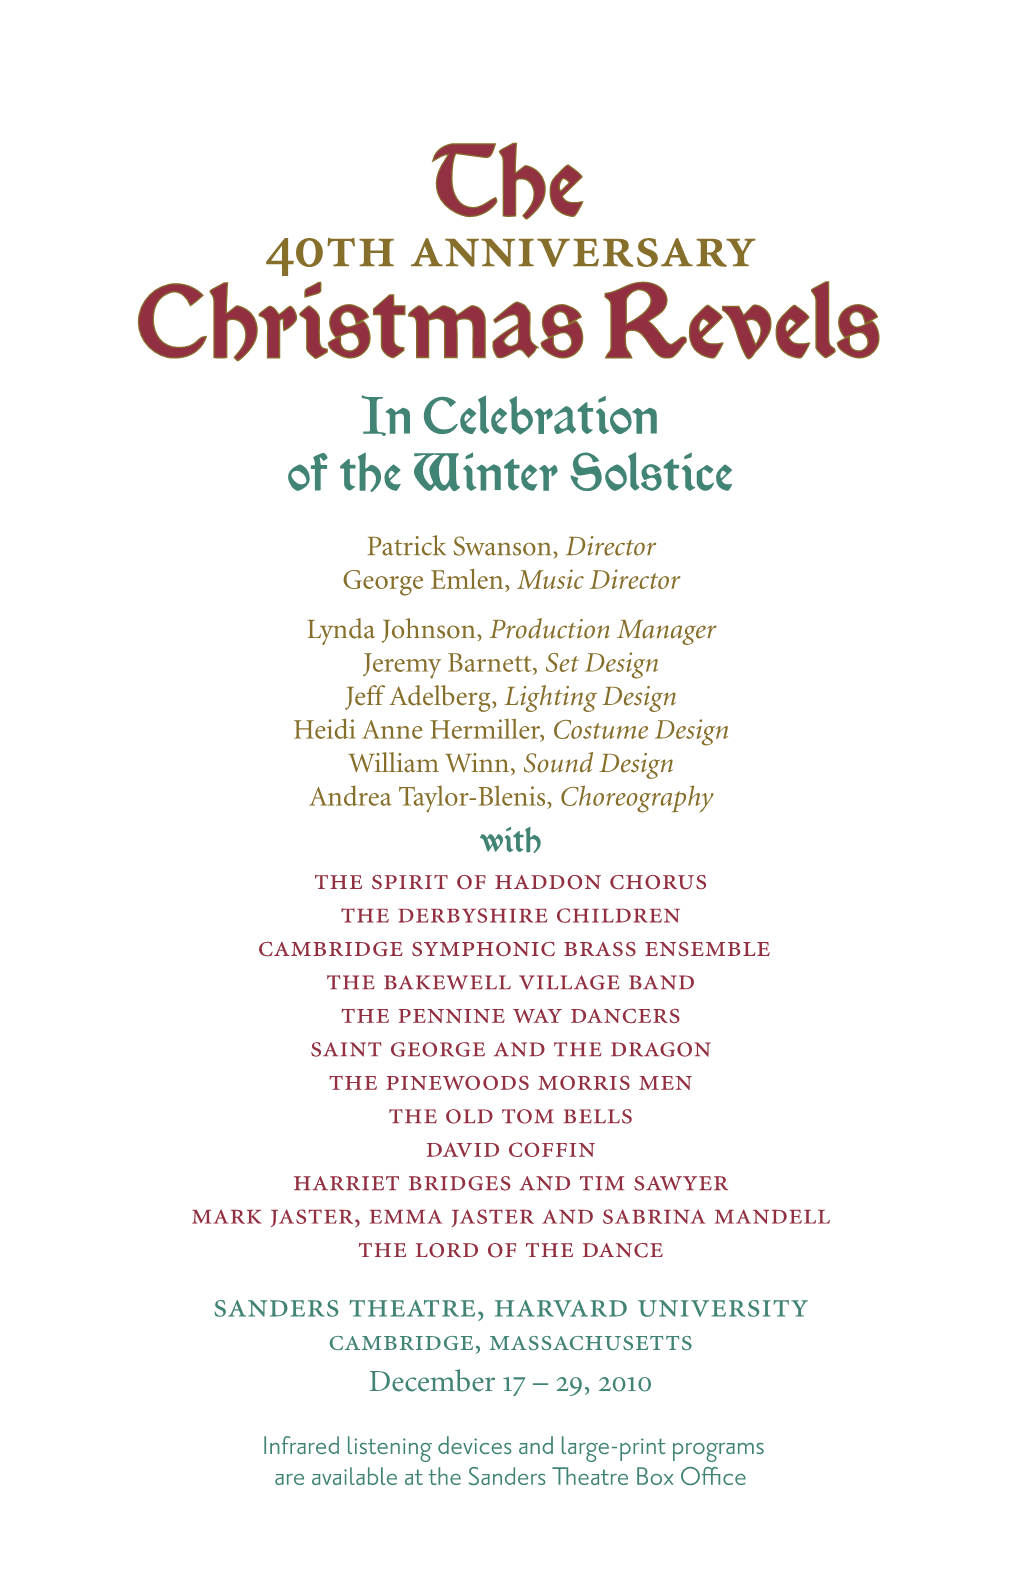 Christmas Revels in Celebration of the Winter Solstice